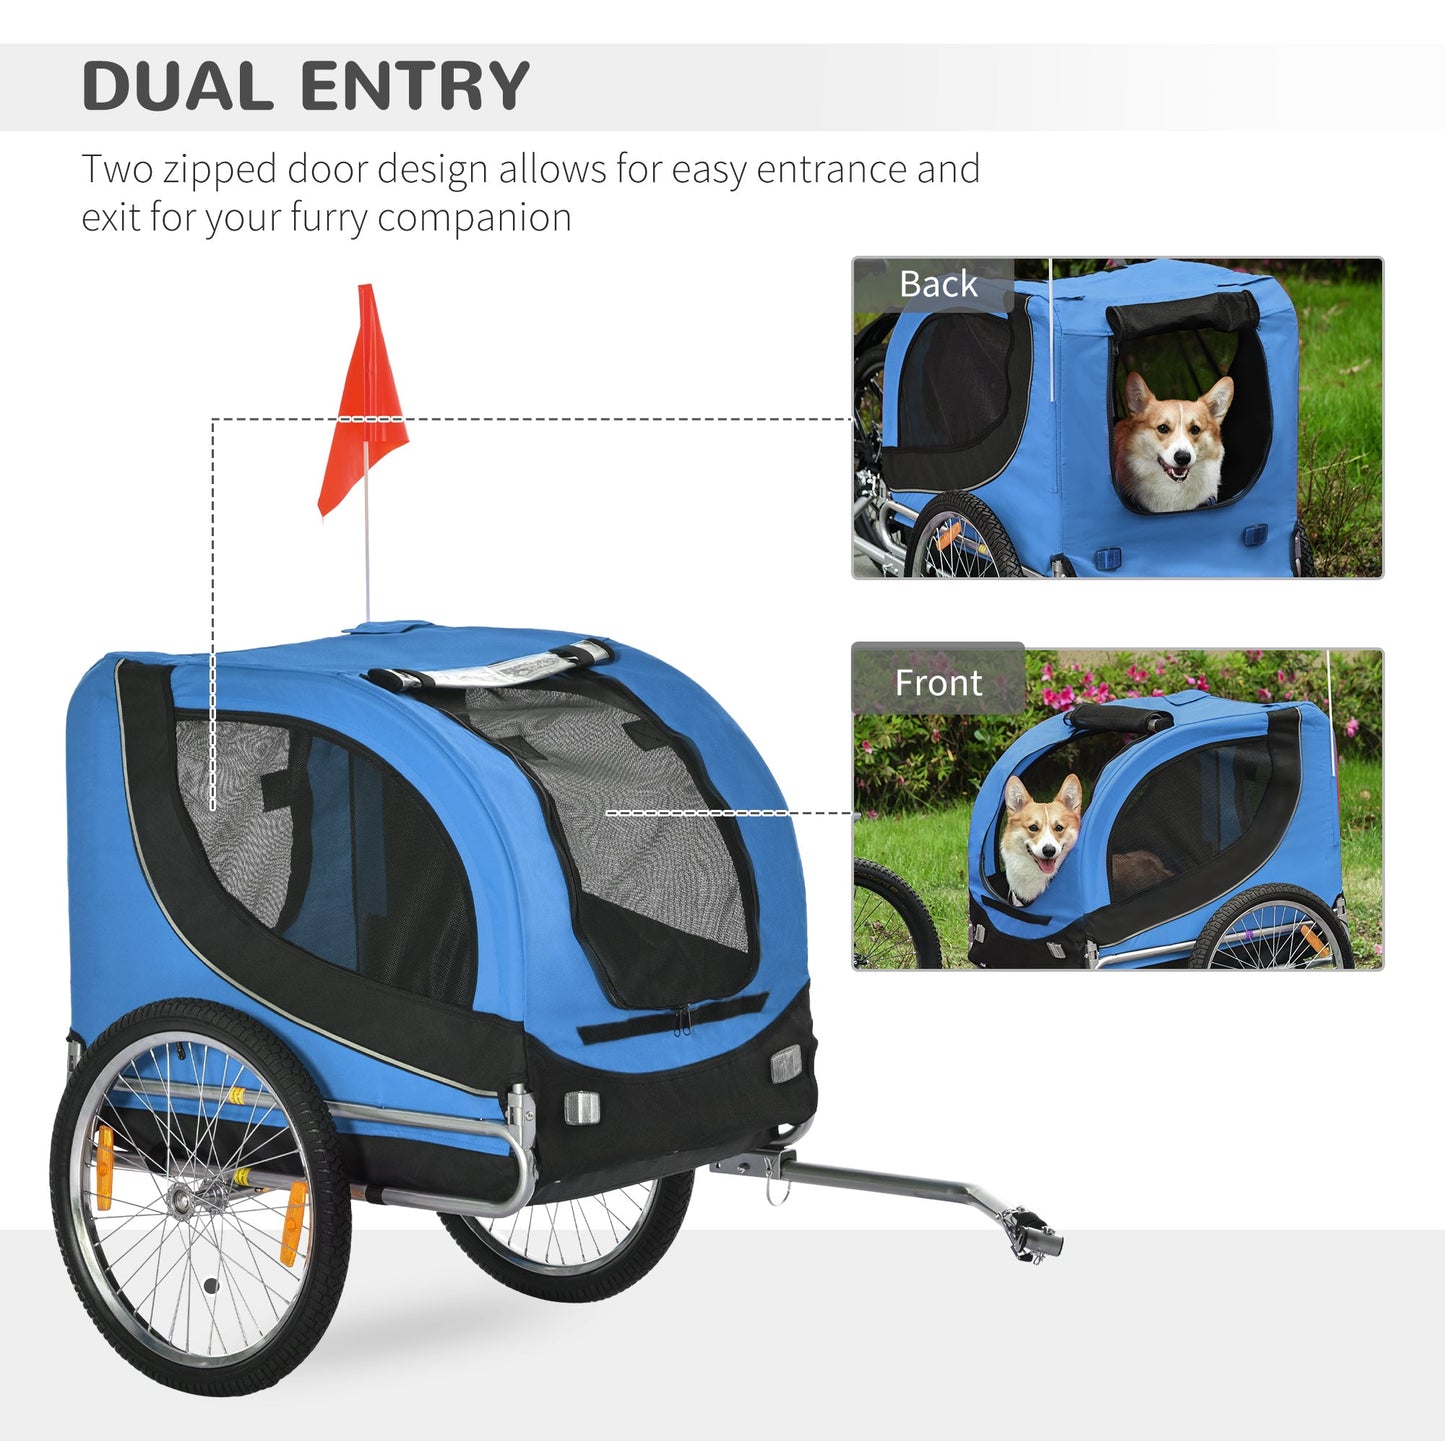 Dog Bike, Trailer Foldable Pet Cart, Bicycle Wagon, Cargo Carrier Attachment for Travelling w/ Safety Anchor, Blue at Gallery Canada